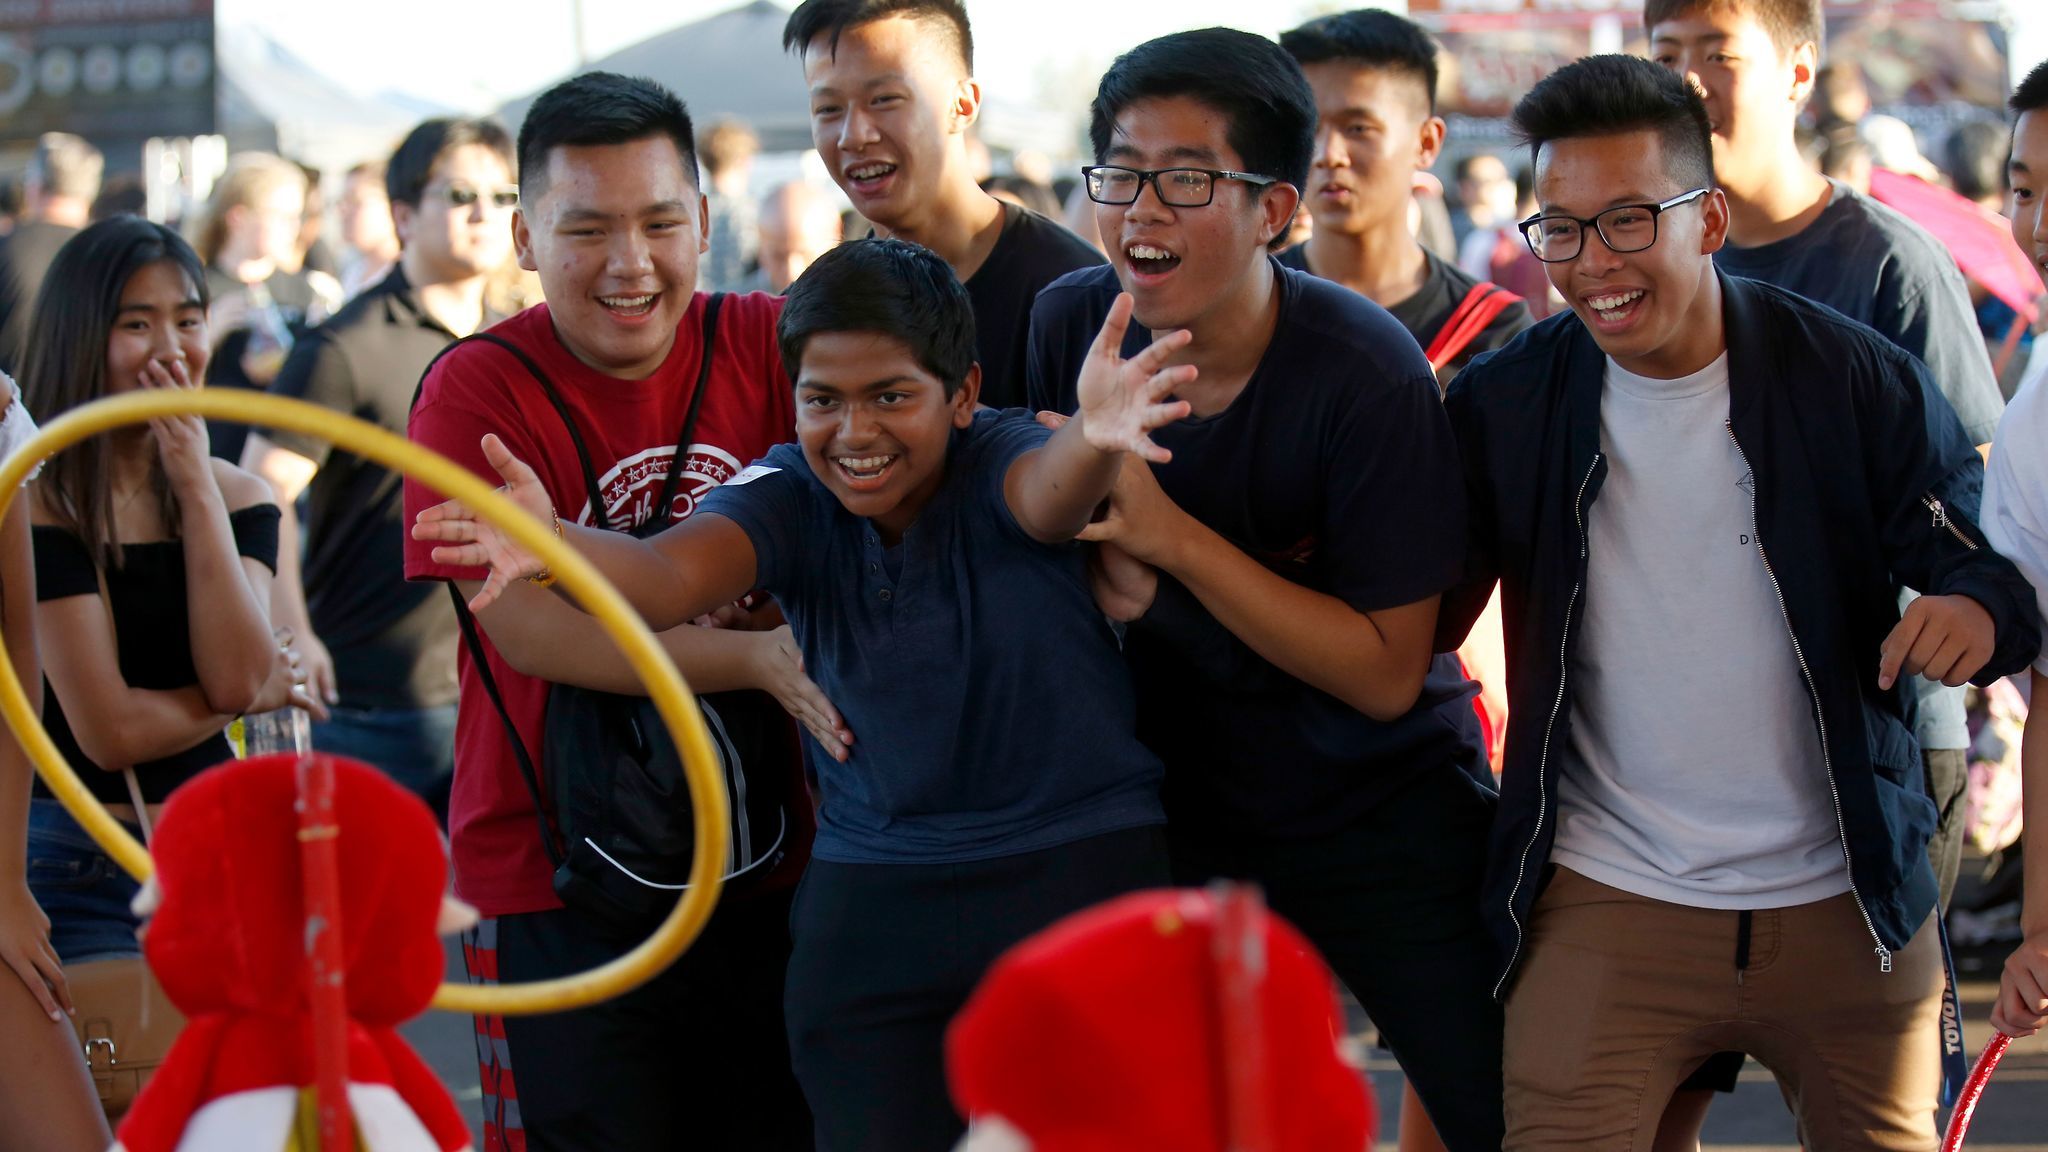 Roshan Kannan, 15, center, of Arcadia, is surrounded by friends as he tosses a ring in hopes of winning a stuffed animal at the 626 Night Market in Arcadia.